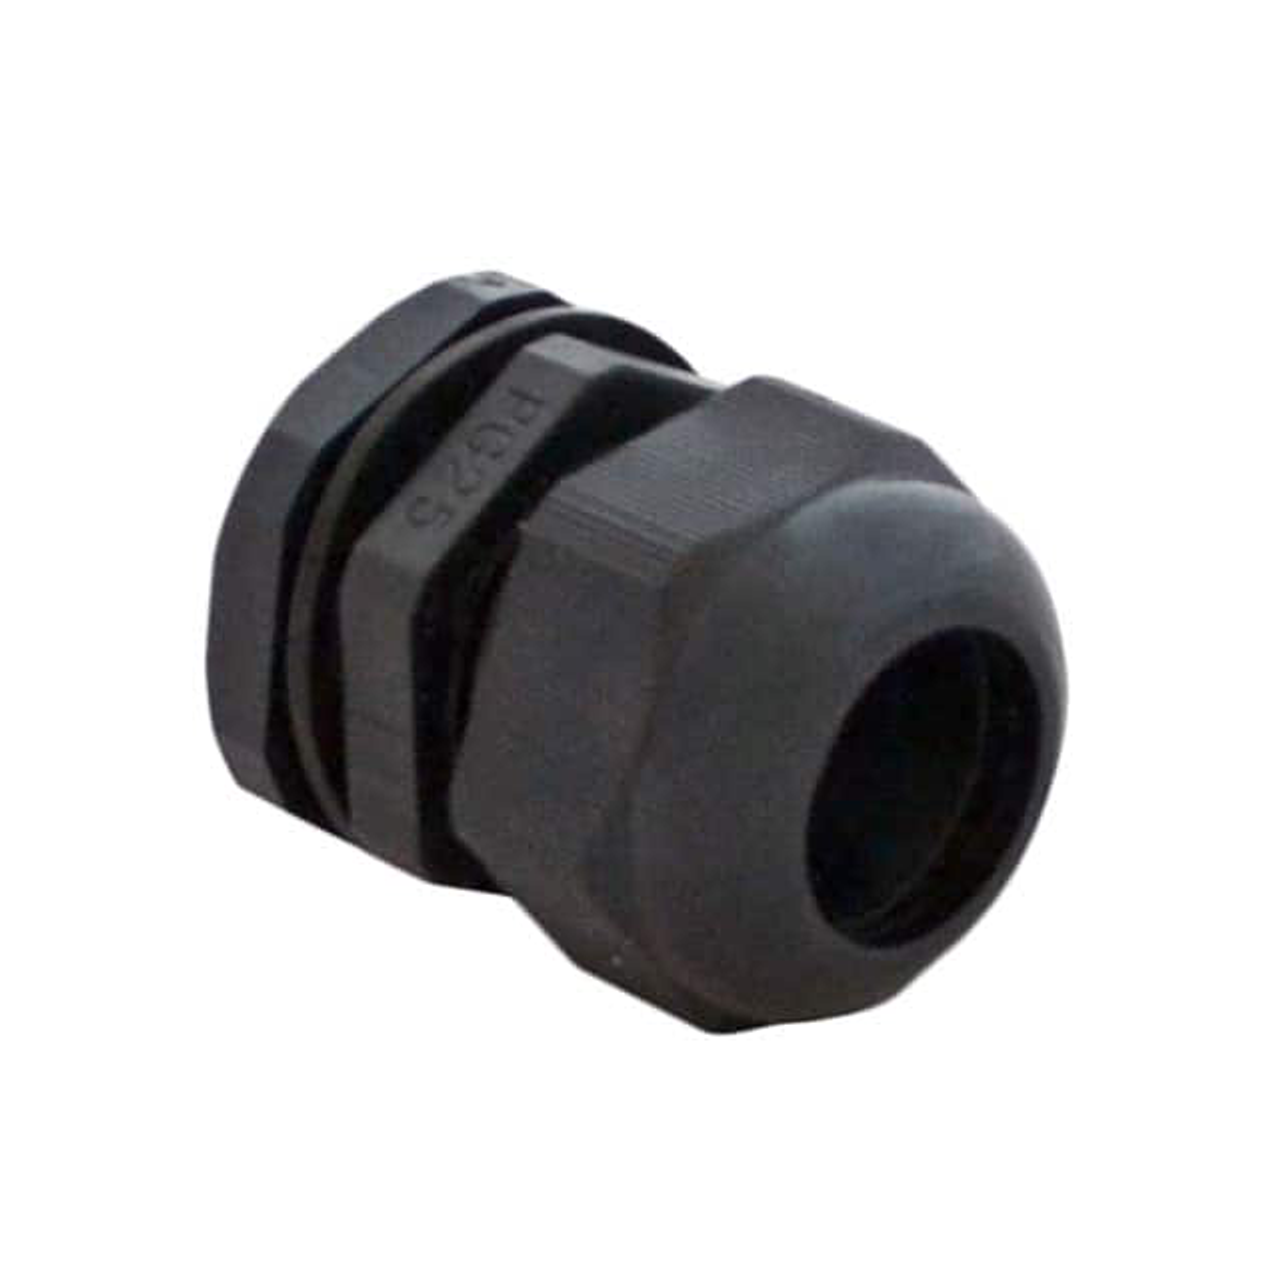 Bud Industries Inc. IPG-22225 Cable Glands